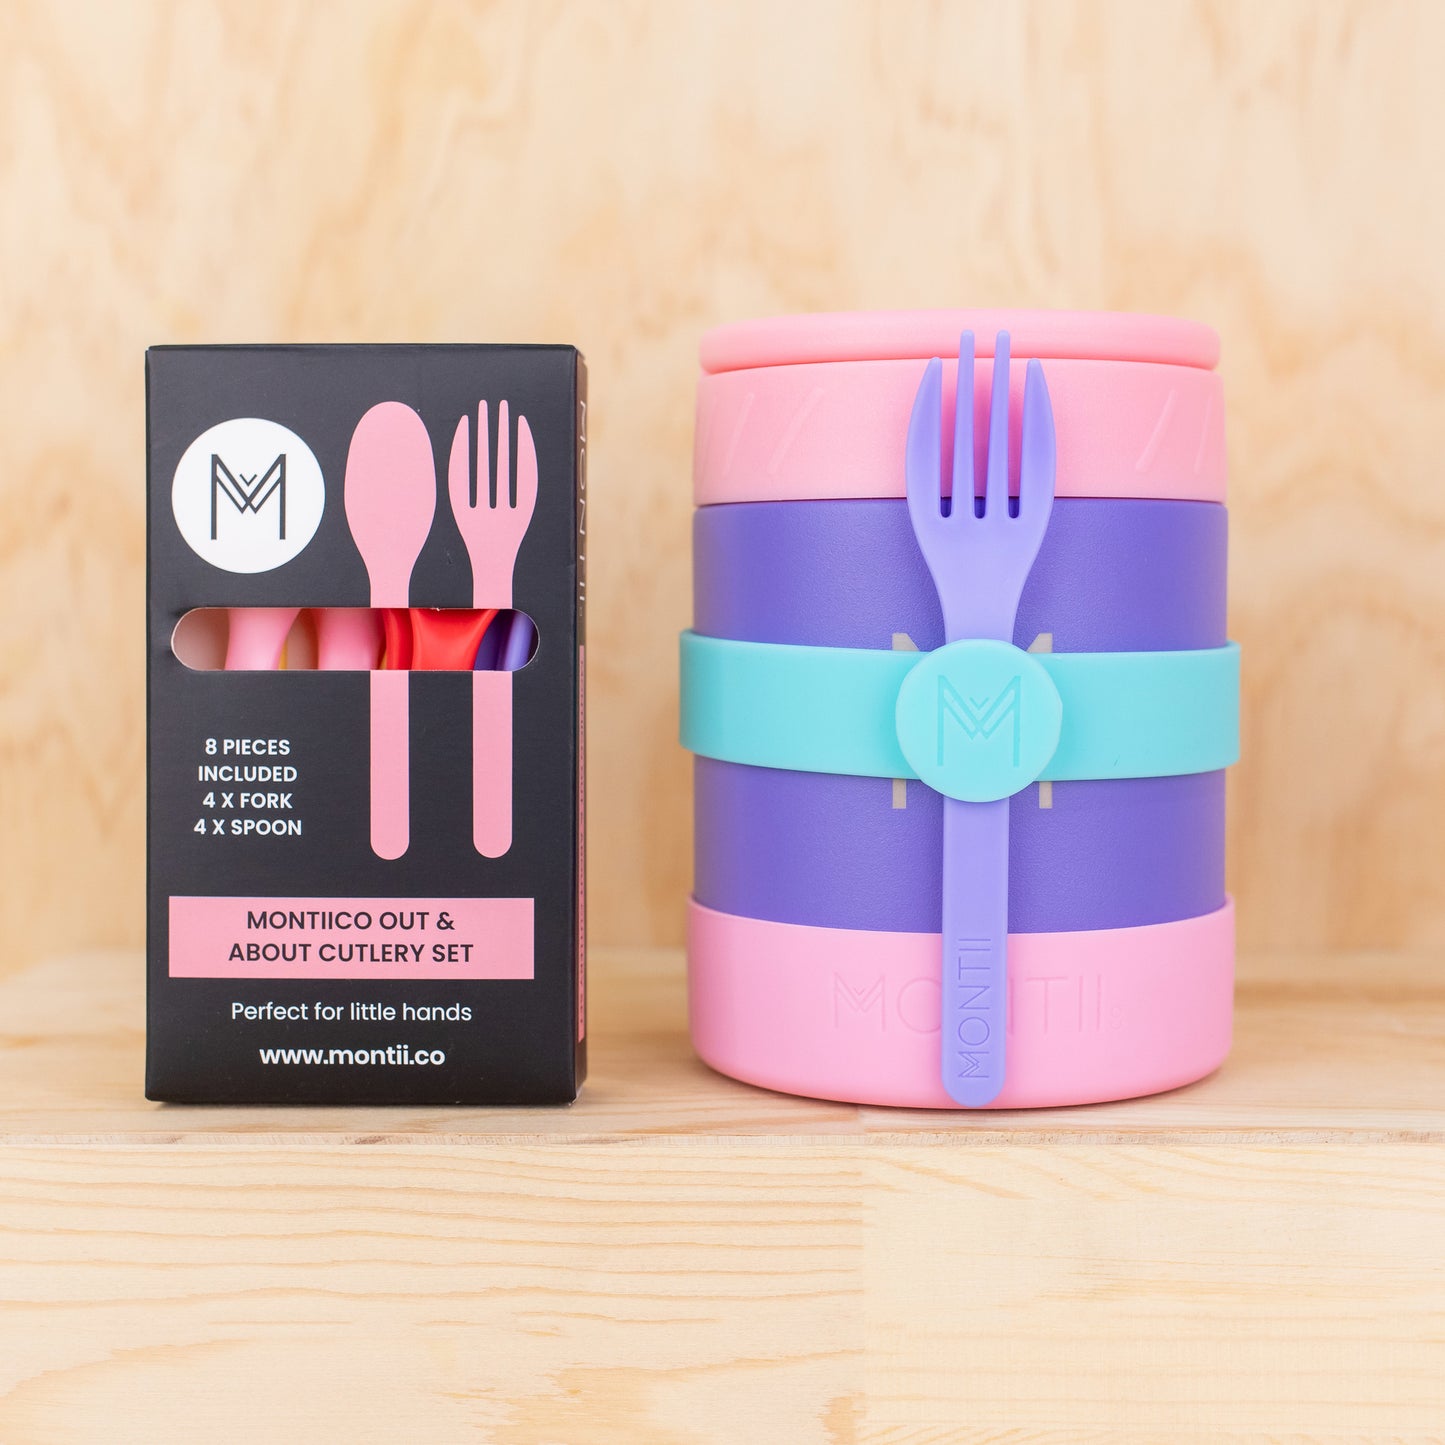 MontiiCo Out & About Cutlery Set - Strawberry